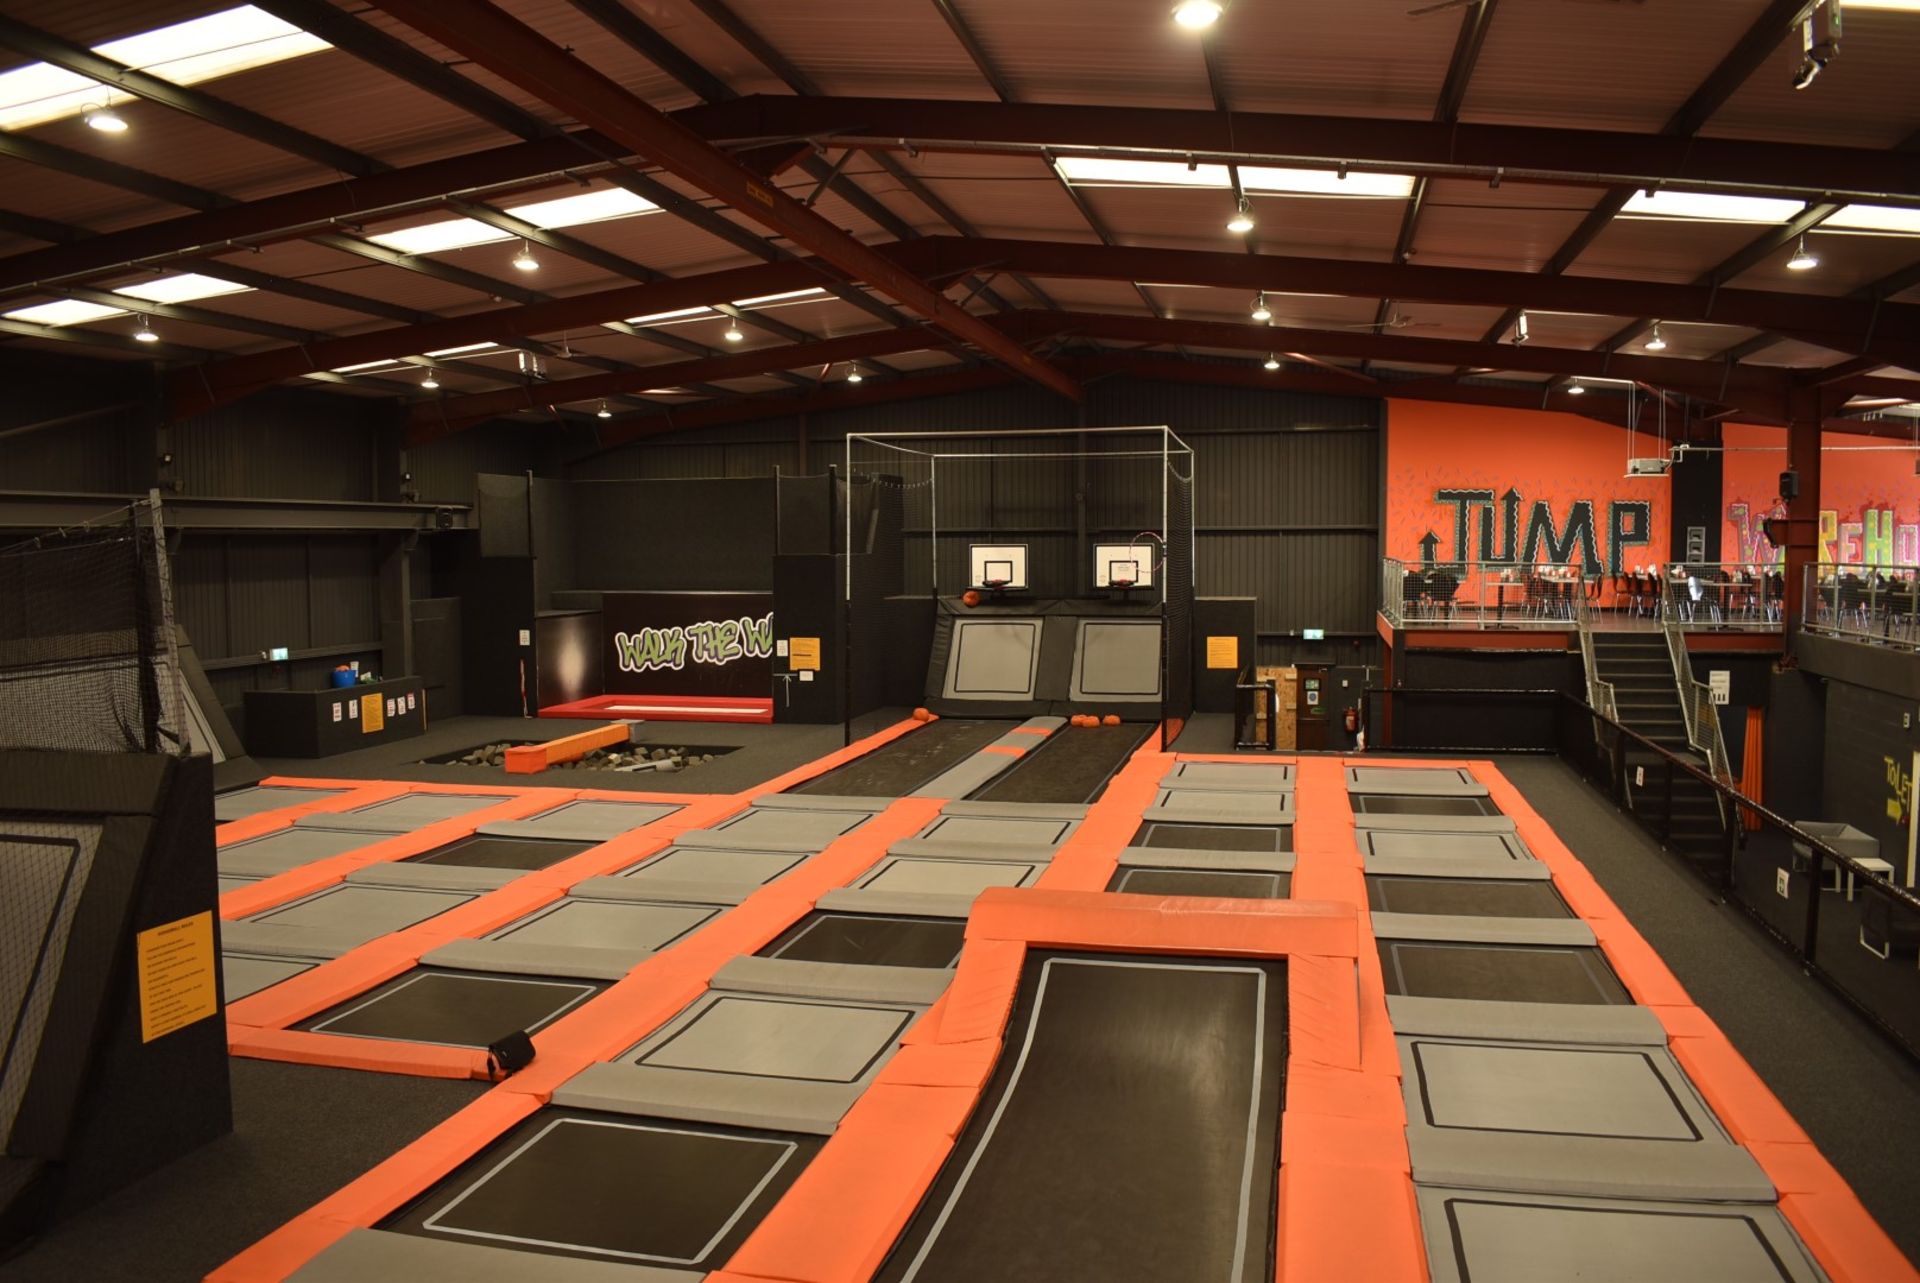 1 x Large Trampoline Park - Disassembled - Includes Dodgeball Arena And Jump Tower - CL766  - - Image 69 of 99